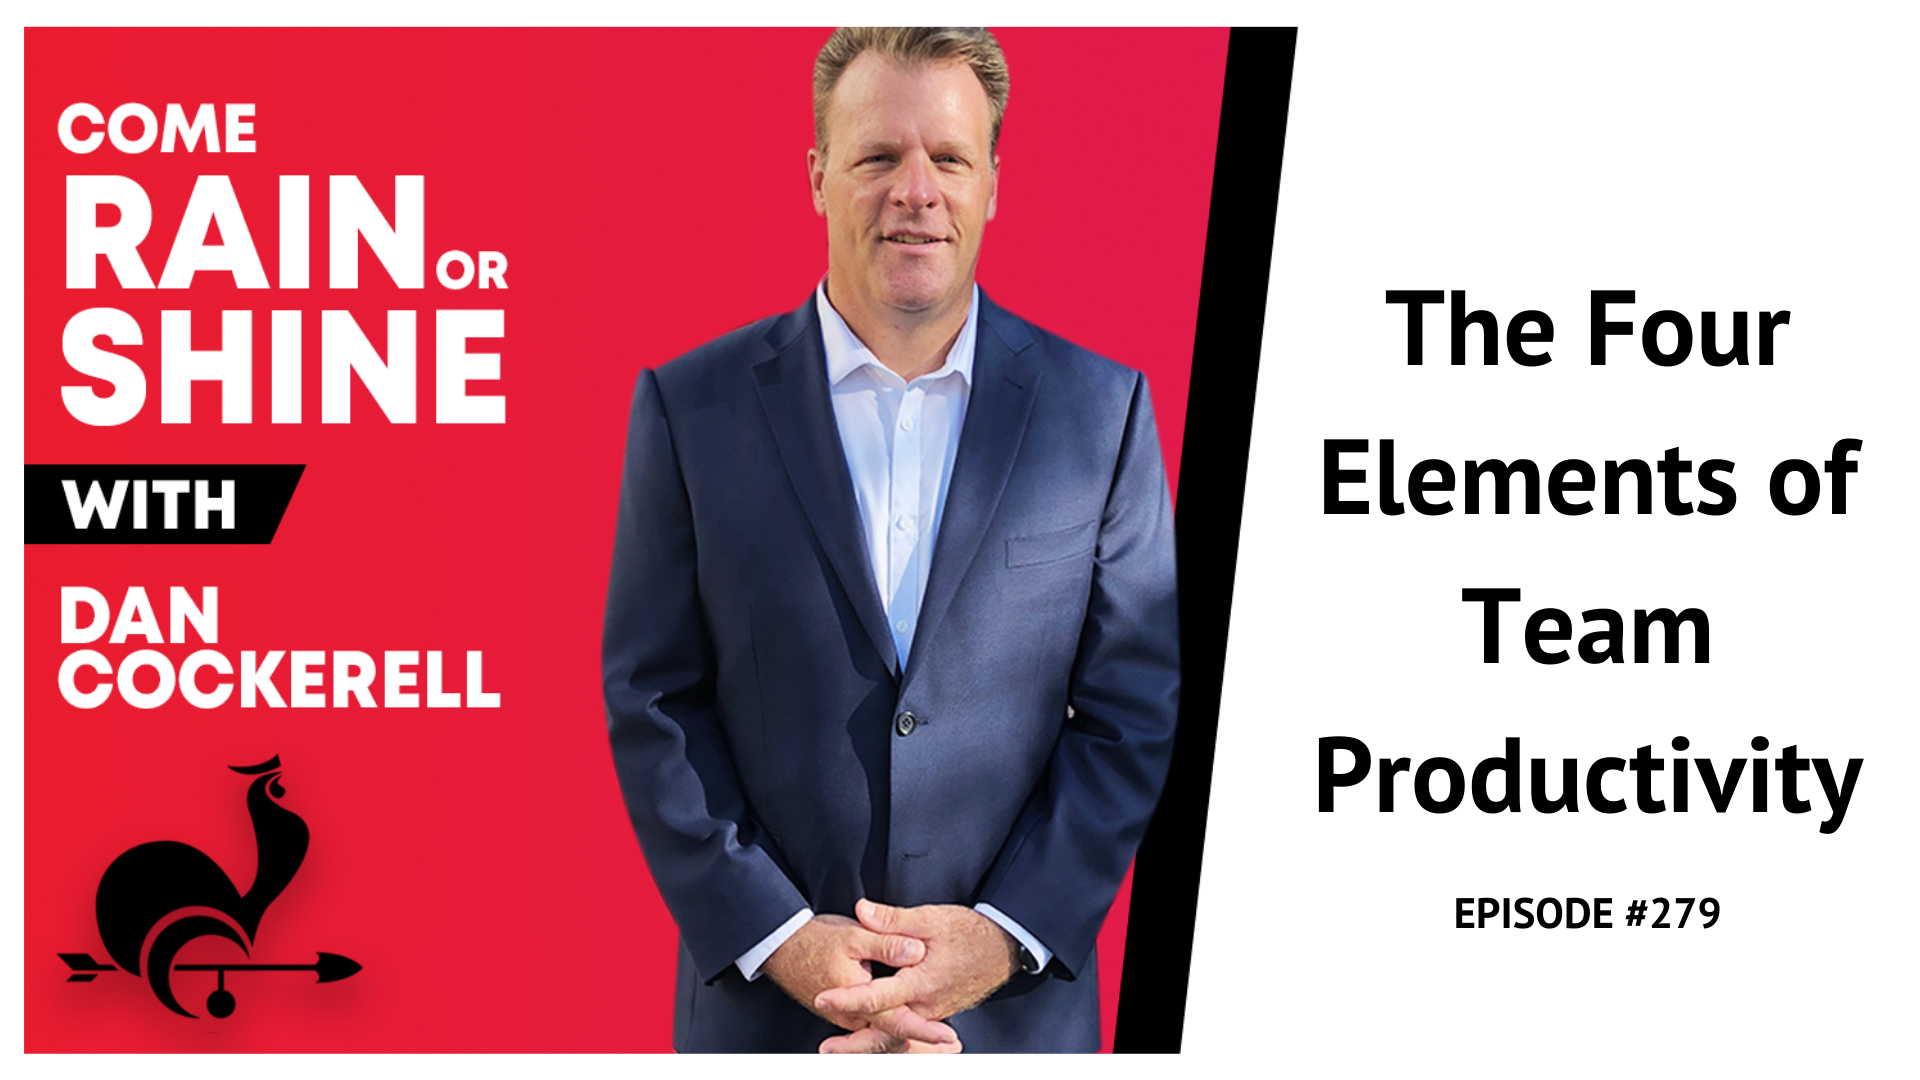 Come Rain or Shine Episode 279 The Four Elements of Team Productivity